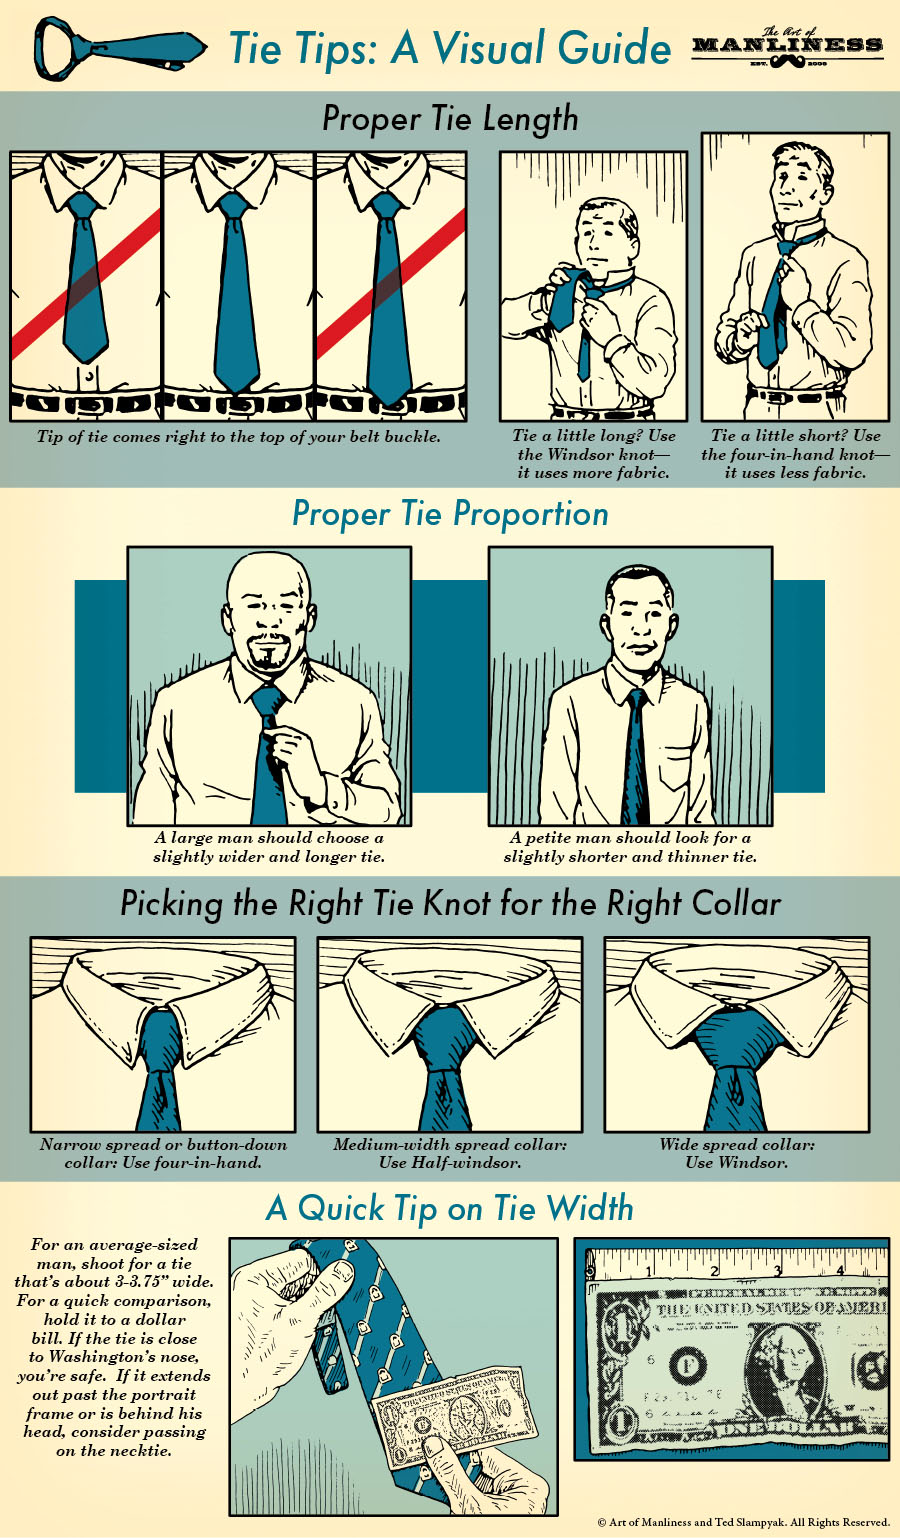 Tie Tips: A Visual Guide  Proper Tie Length. Tip of tie comes right to the top of your belt buckle. Tie a little long? Use the Windsor Knot – it uses more fabric. Tie a little short? Use the four-in-hand knot – it uses less fabric.  Proper Tie Proportion. A large man should choose a slightly wider and longer tie. A petite man should look for a slightly shorter and thinner tie.  Picking the Right Tie Know for the Right Collar. Narrow spread or button collar – use four-in-hand. Medium-width spread collar – use Hald-windsor. Wide spread collar – use Windsor.  A Quick Tip on Tie Width. For an average-sized man, shoot for a tie that’s about 3-3.75” wide. For a quick comparison, hold it to a dollar bill. If the tie is close to Washington’s nose, you’re safe. If it extends past the portrait frame or is behind his head, consider passing on the necktie. 